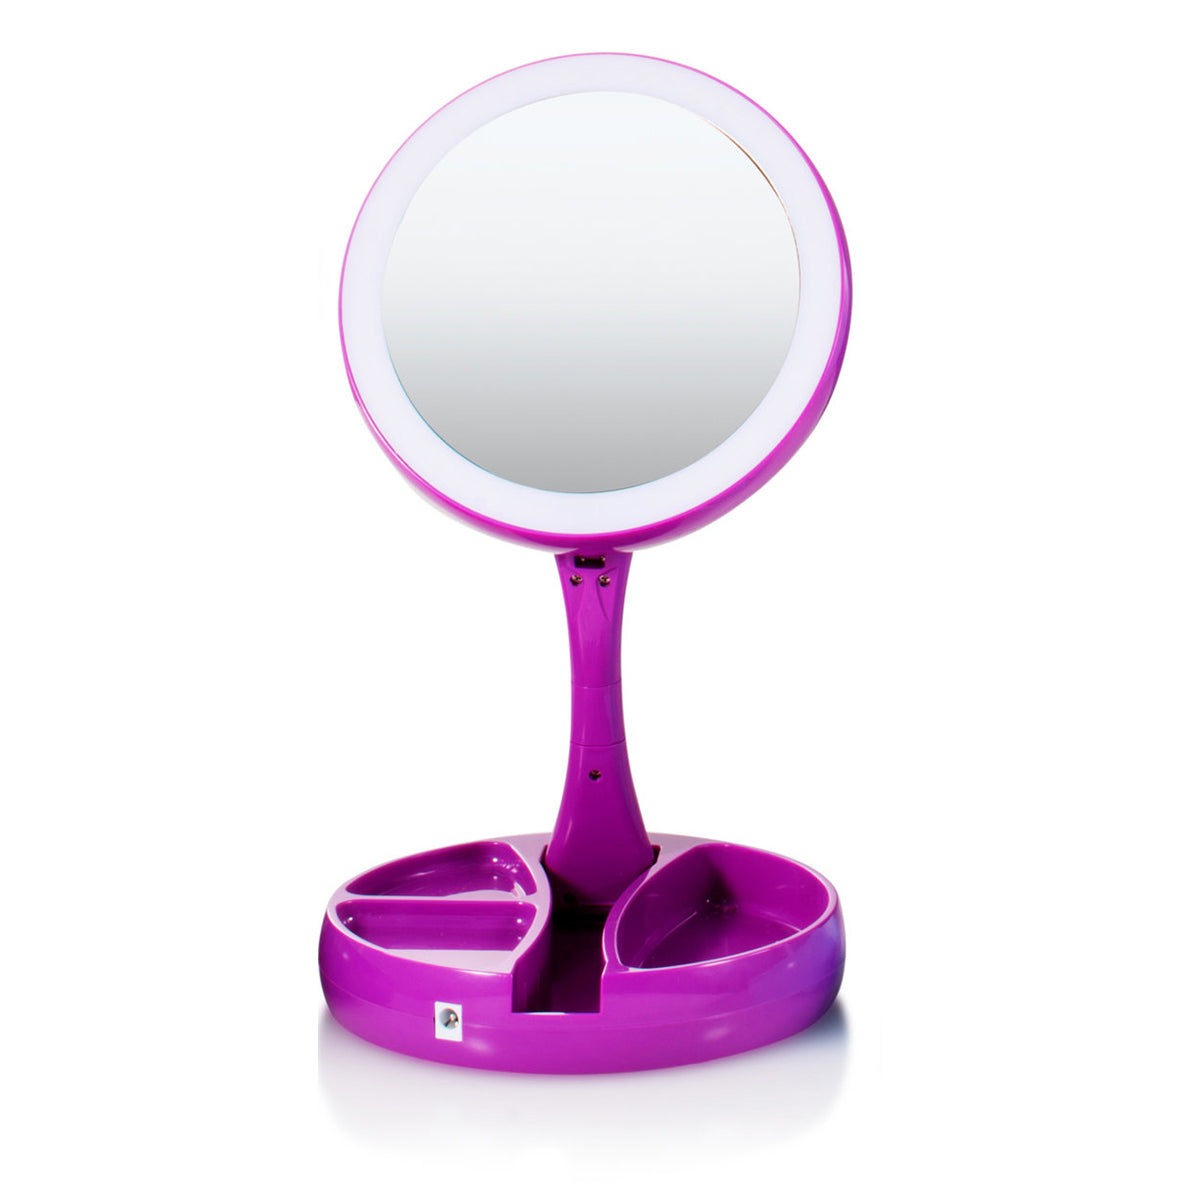 My Foldaway Mirror: LED Lighted, Double-Sided Vanity Mirror with 10x Magnification for Applying Makeup, Shaving, and Grooming